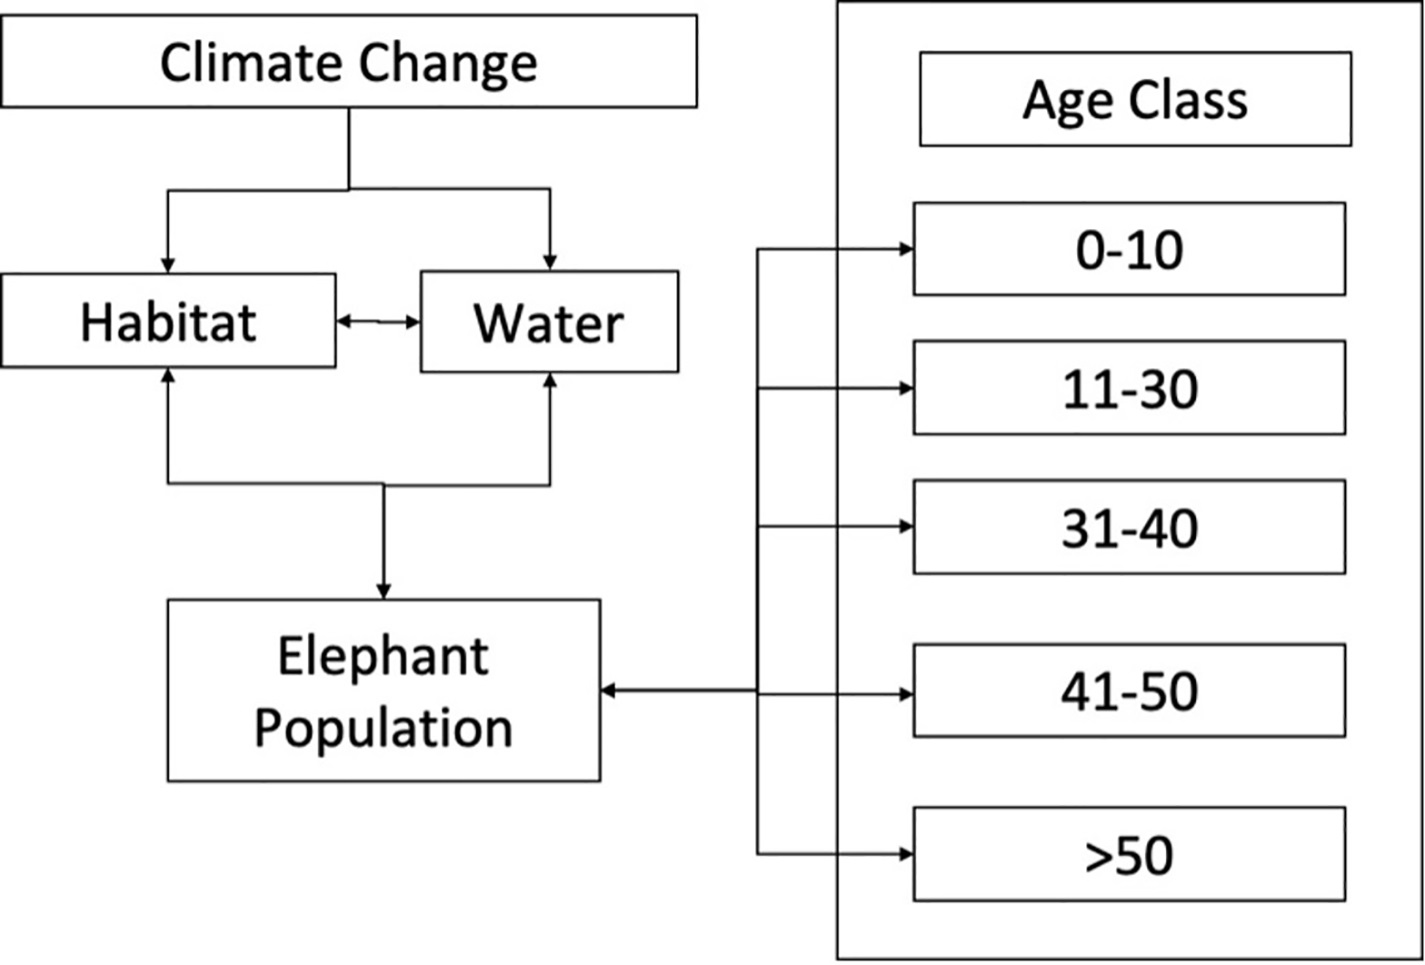 Conceptual model for population dynamics of elephants in GVL, linking climate, habitat changes, and resource variability to population shifts over 50 years.